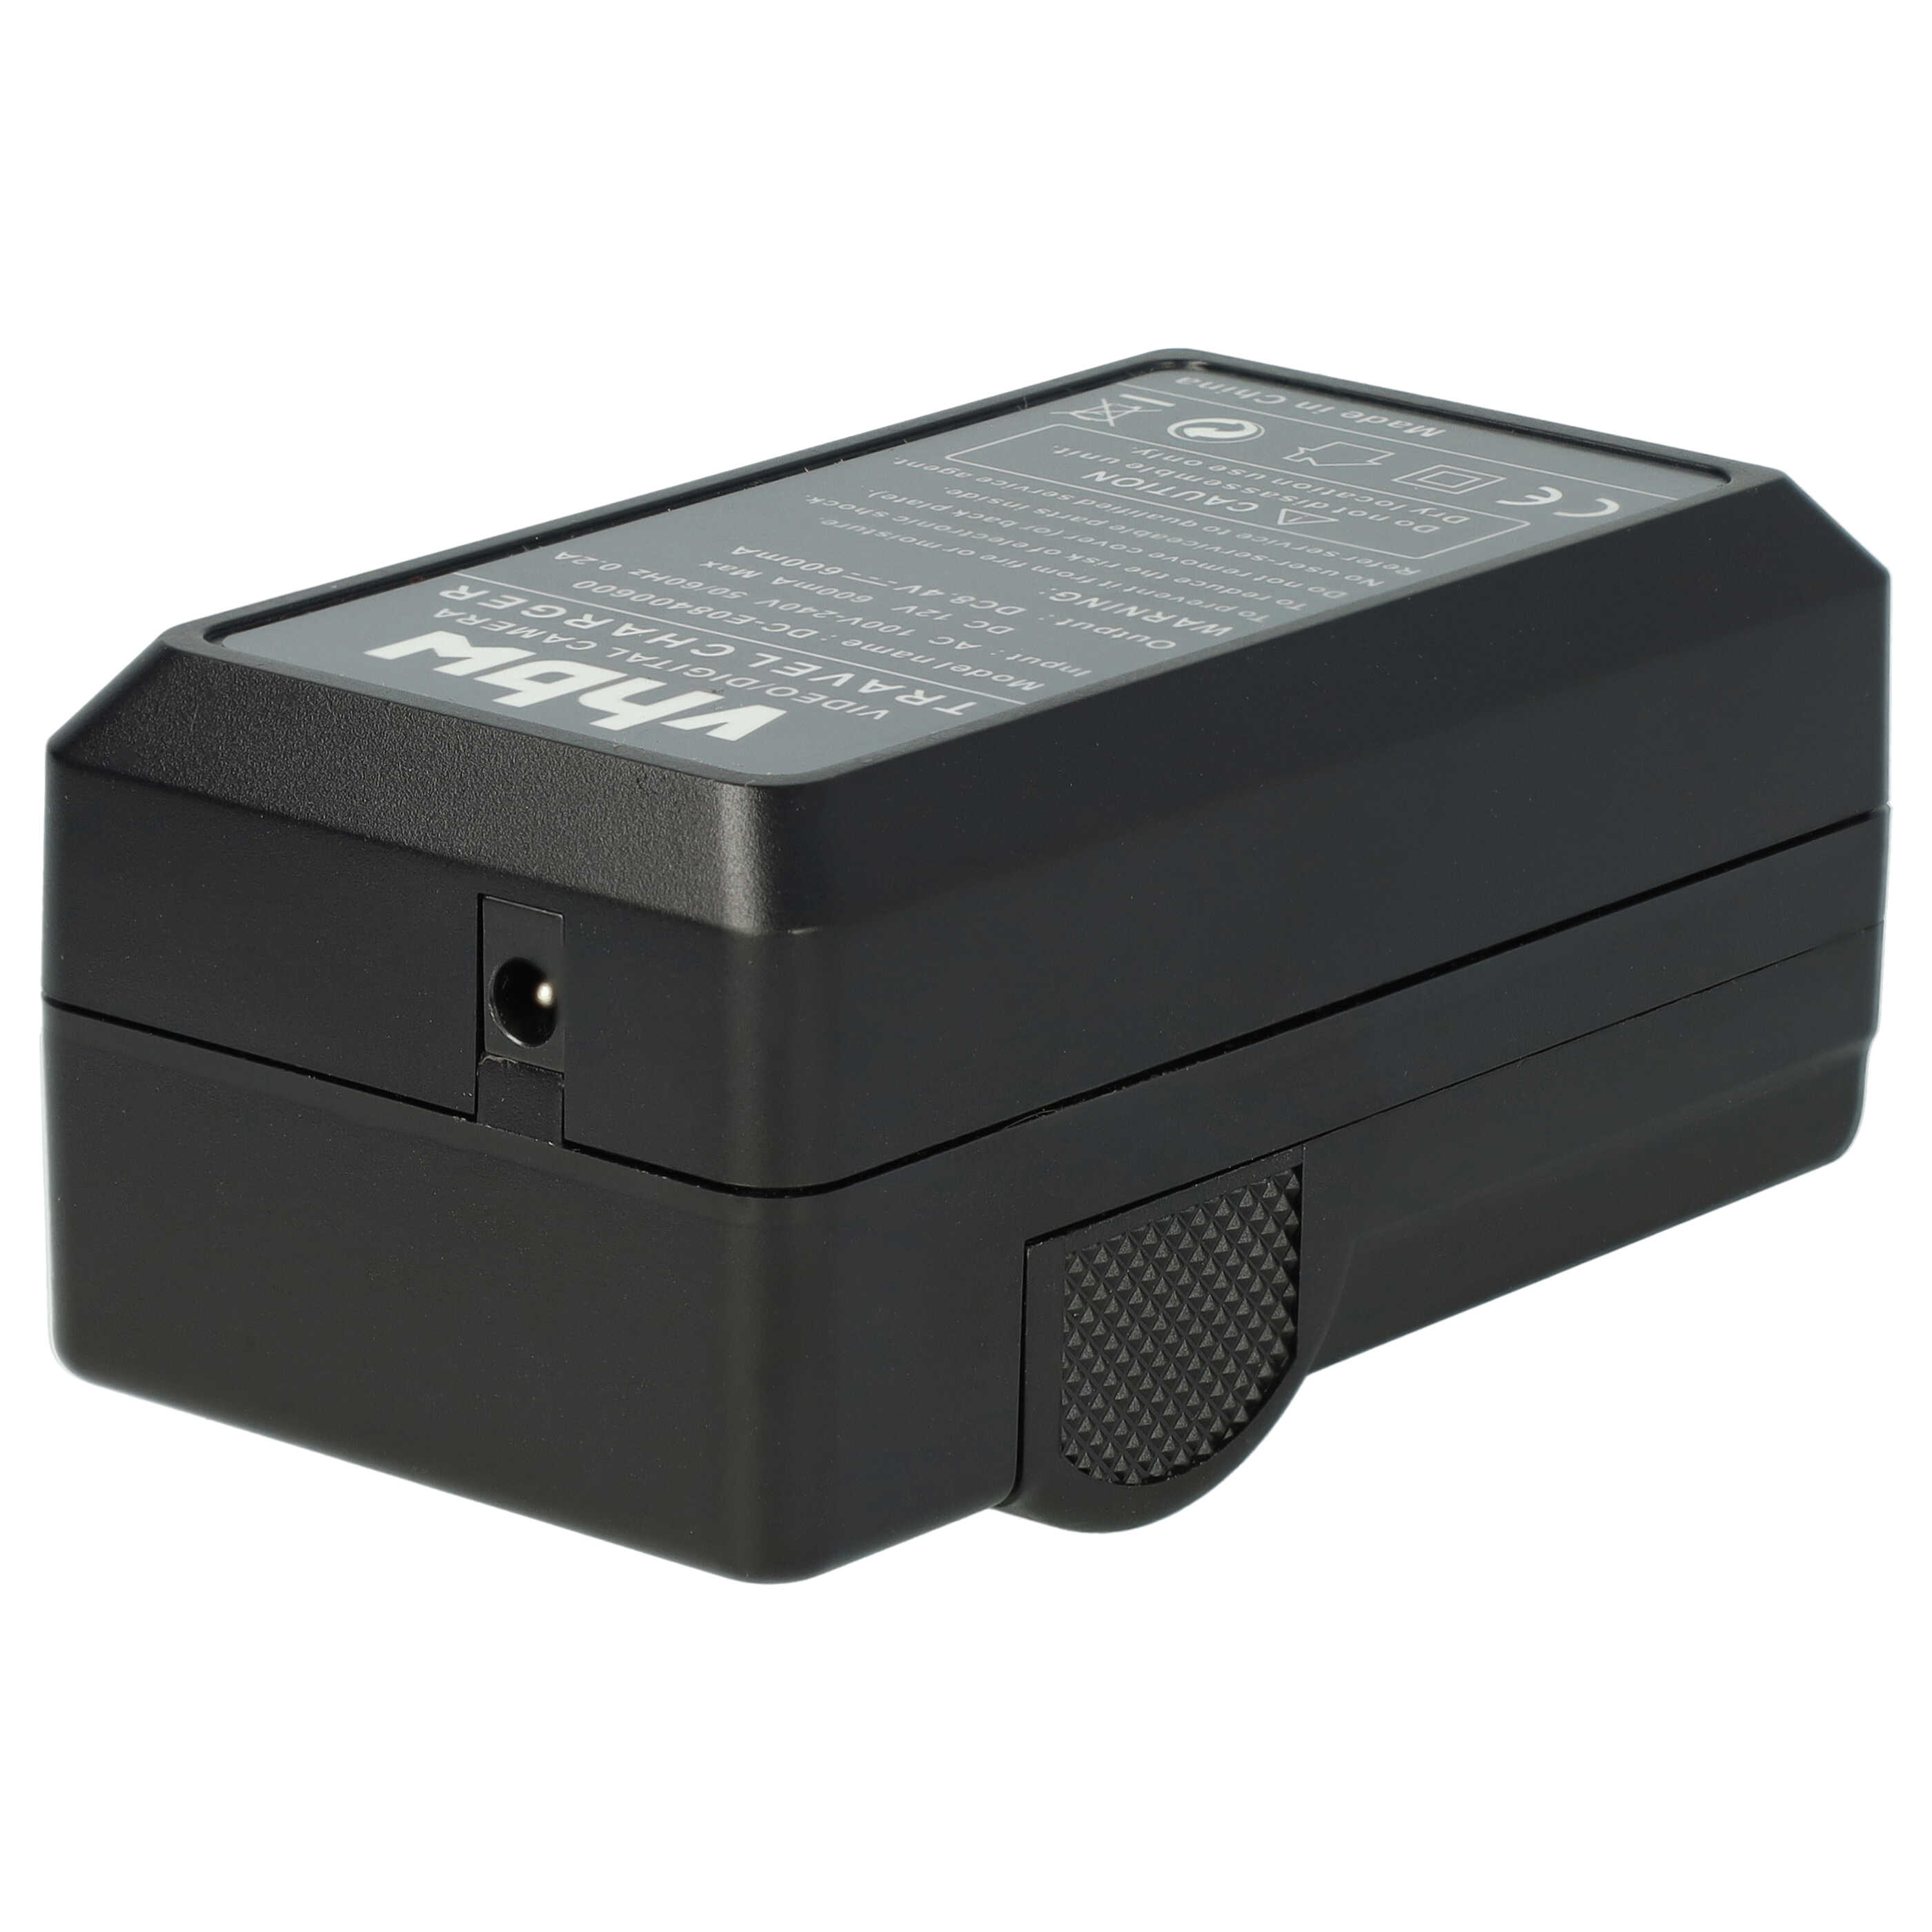 Battery Charger suitable for Coolpix P1000 Camera etc. - 0.6 A, 8.4 V